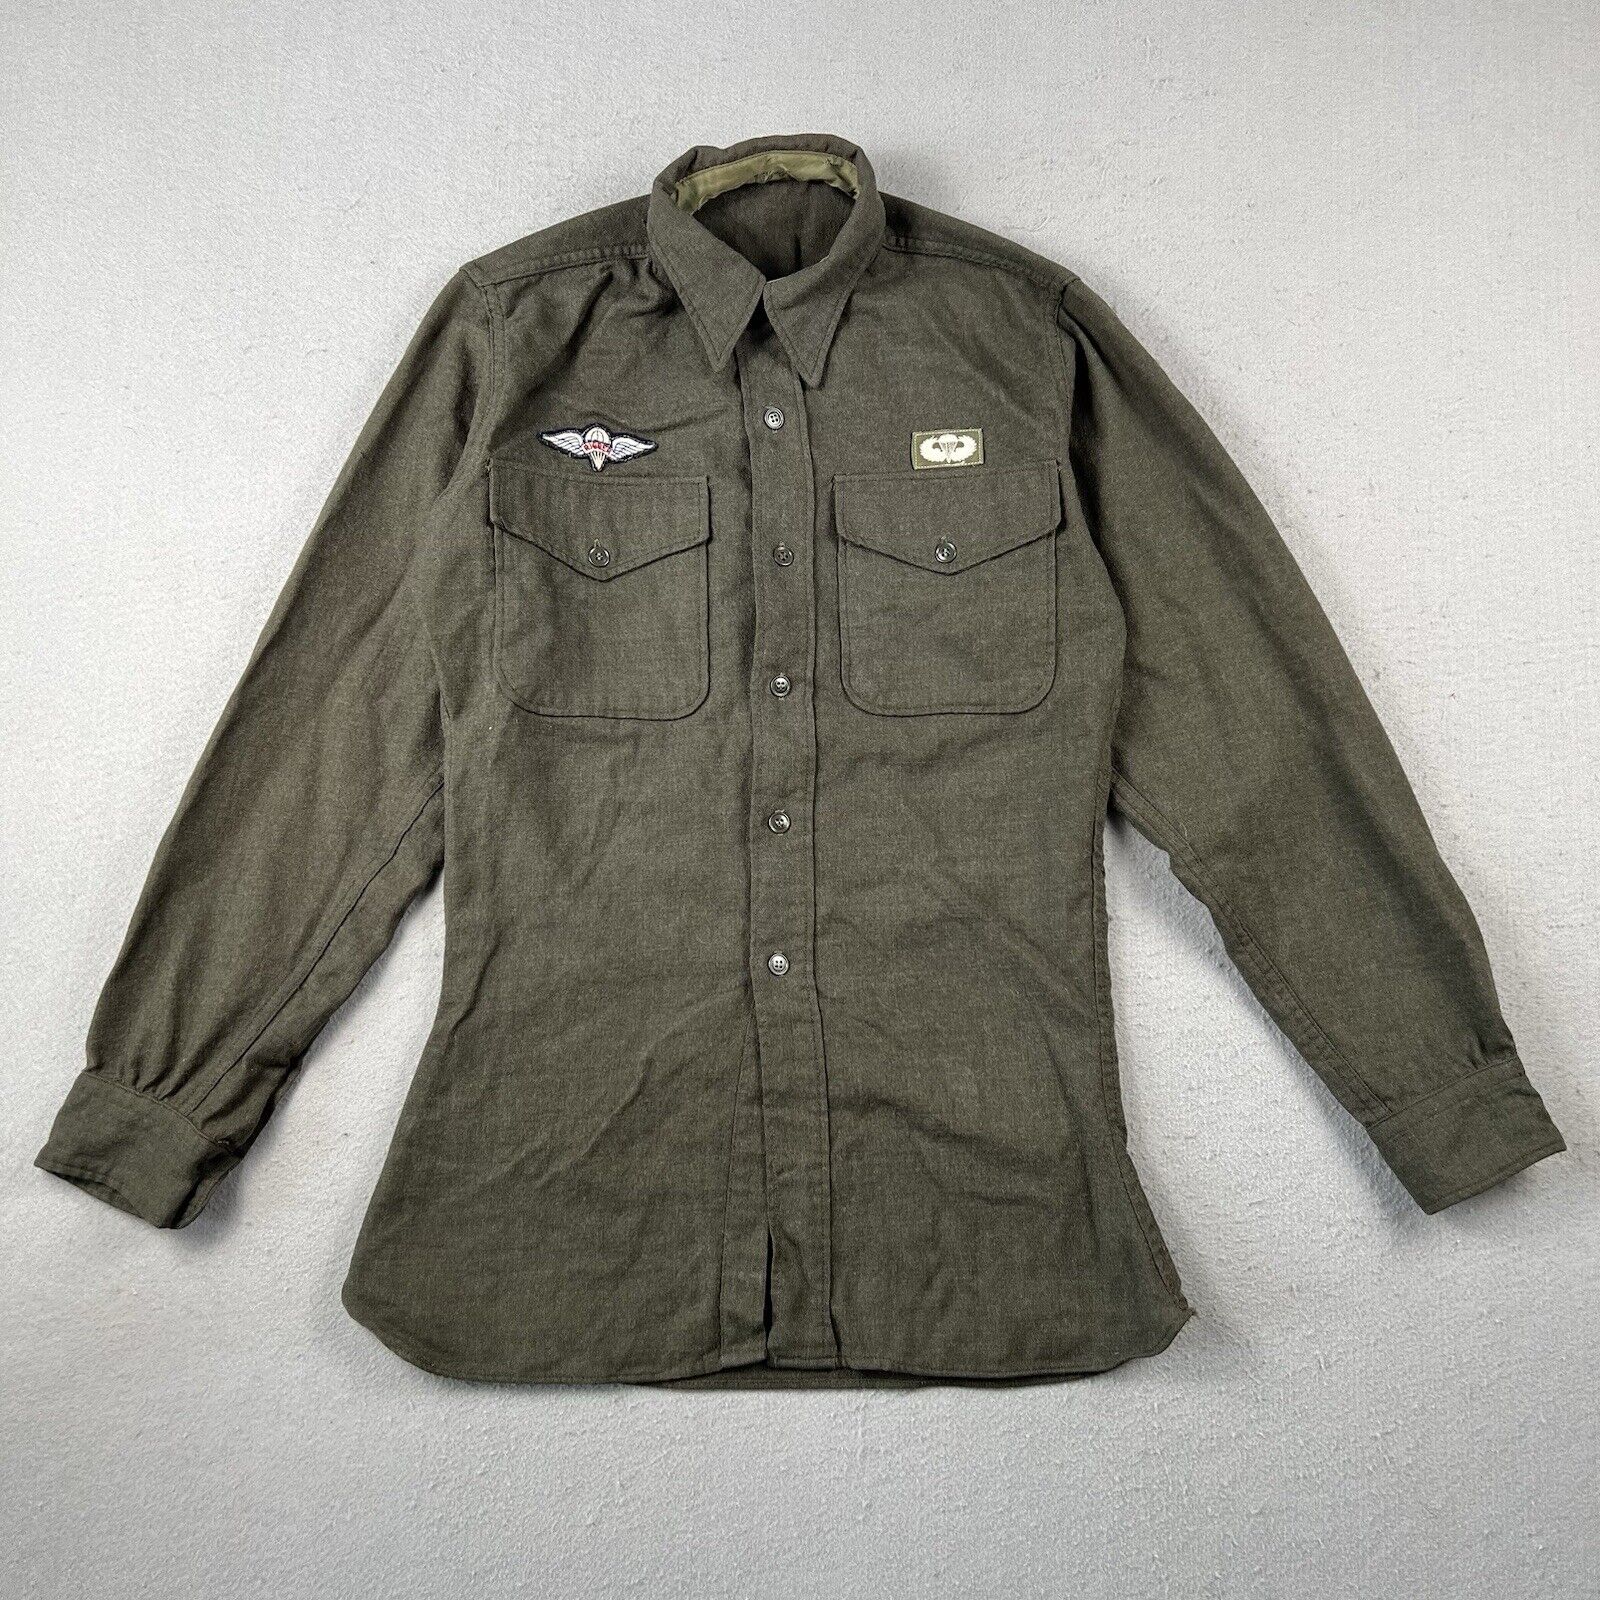 Rare Ww2 US Military Rigger Paratrooper Green Wool Button Up Shirt 15.5-34